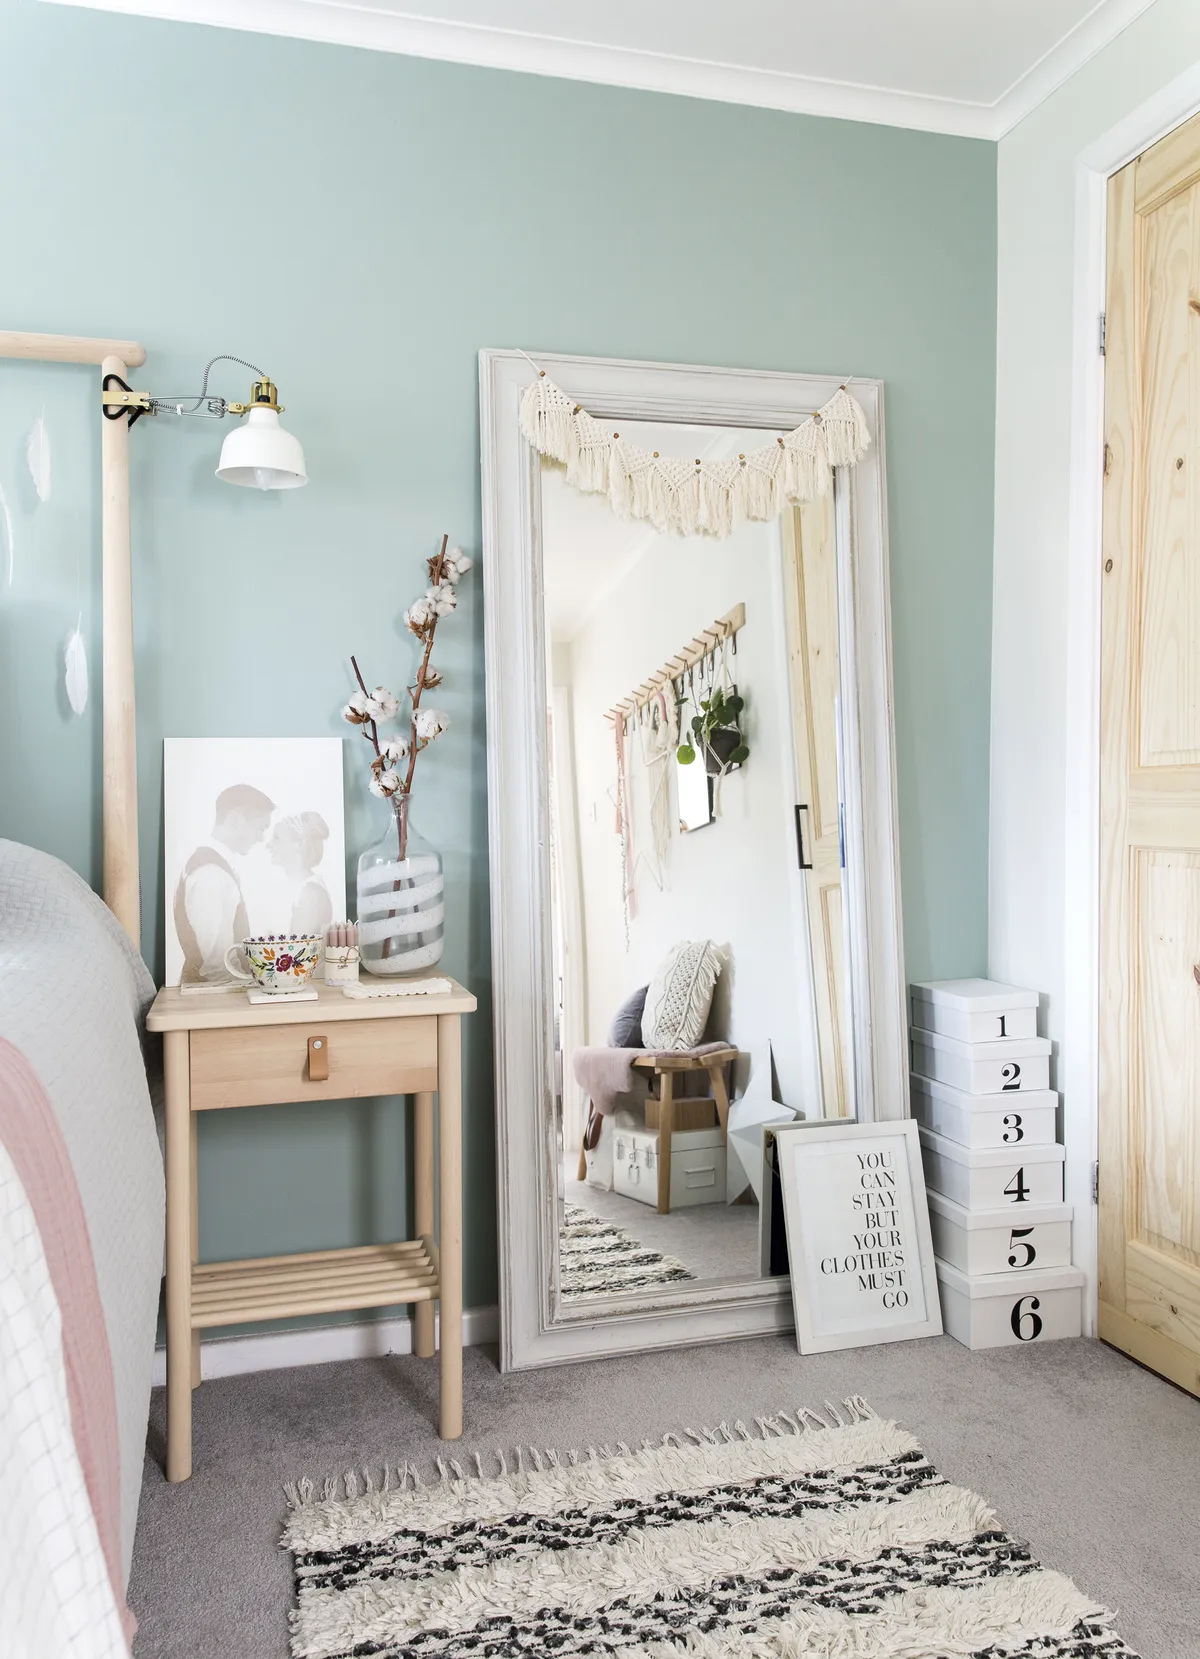 Marnie chose a full-length mirror, which she’s leant against the wall, allowing her to move it around as and when she likes. A rustic rug and soft grey carpet add cosy comfort to the room